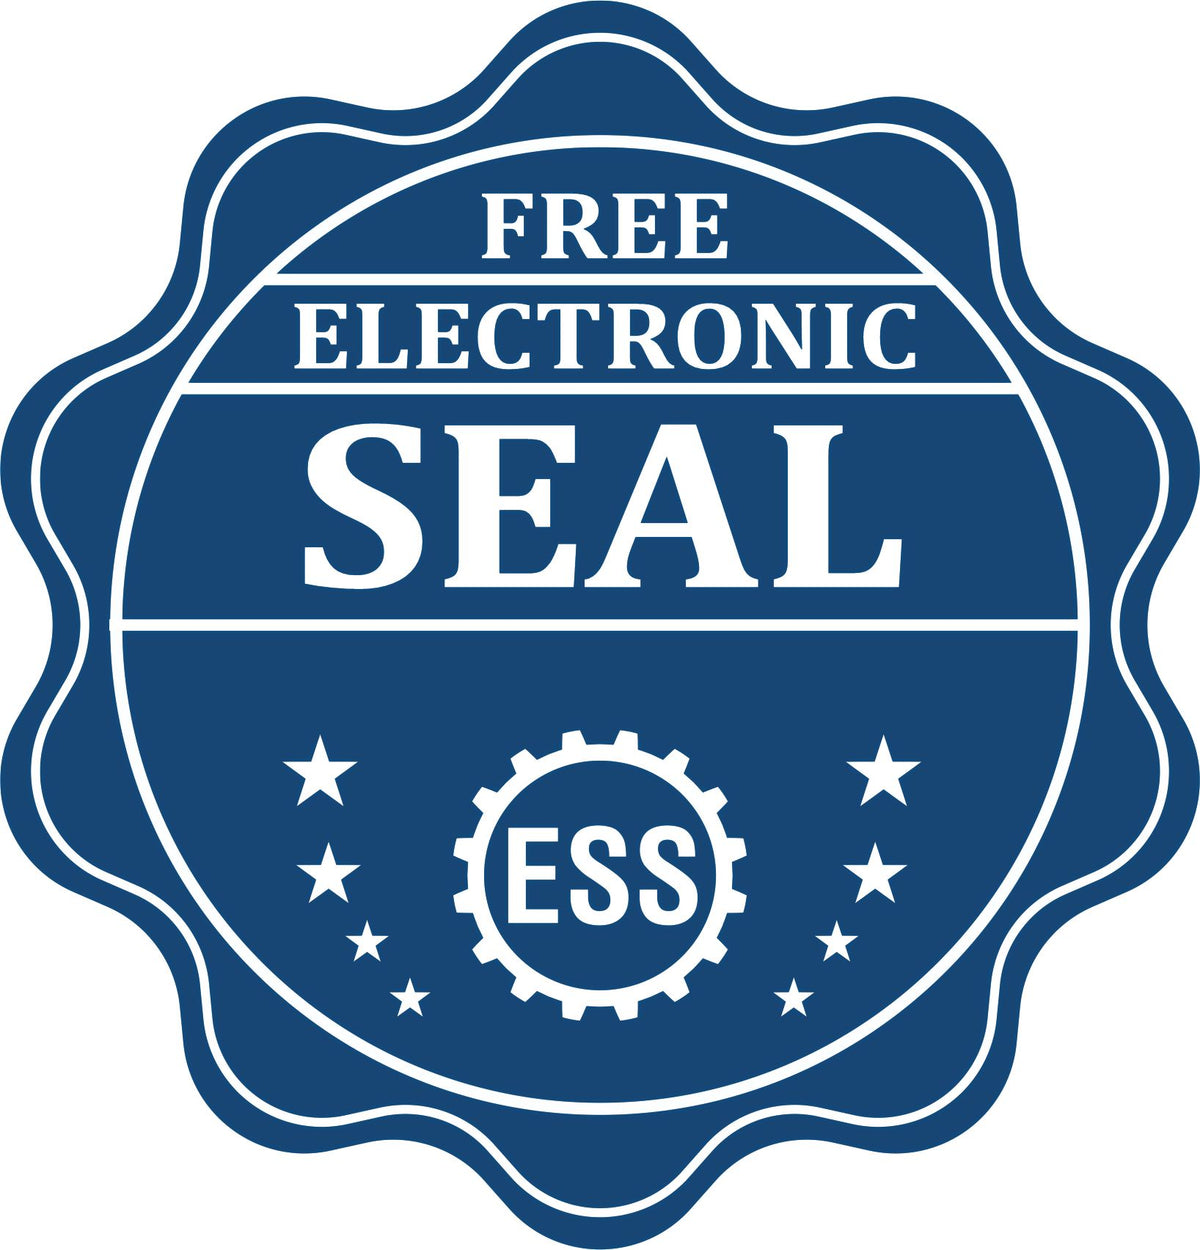 A badge showing a free electronic seal for the Handheld Connecticut Land Surveyor Seal with stars and the ESS gear on the emblem.